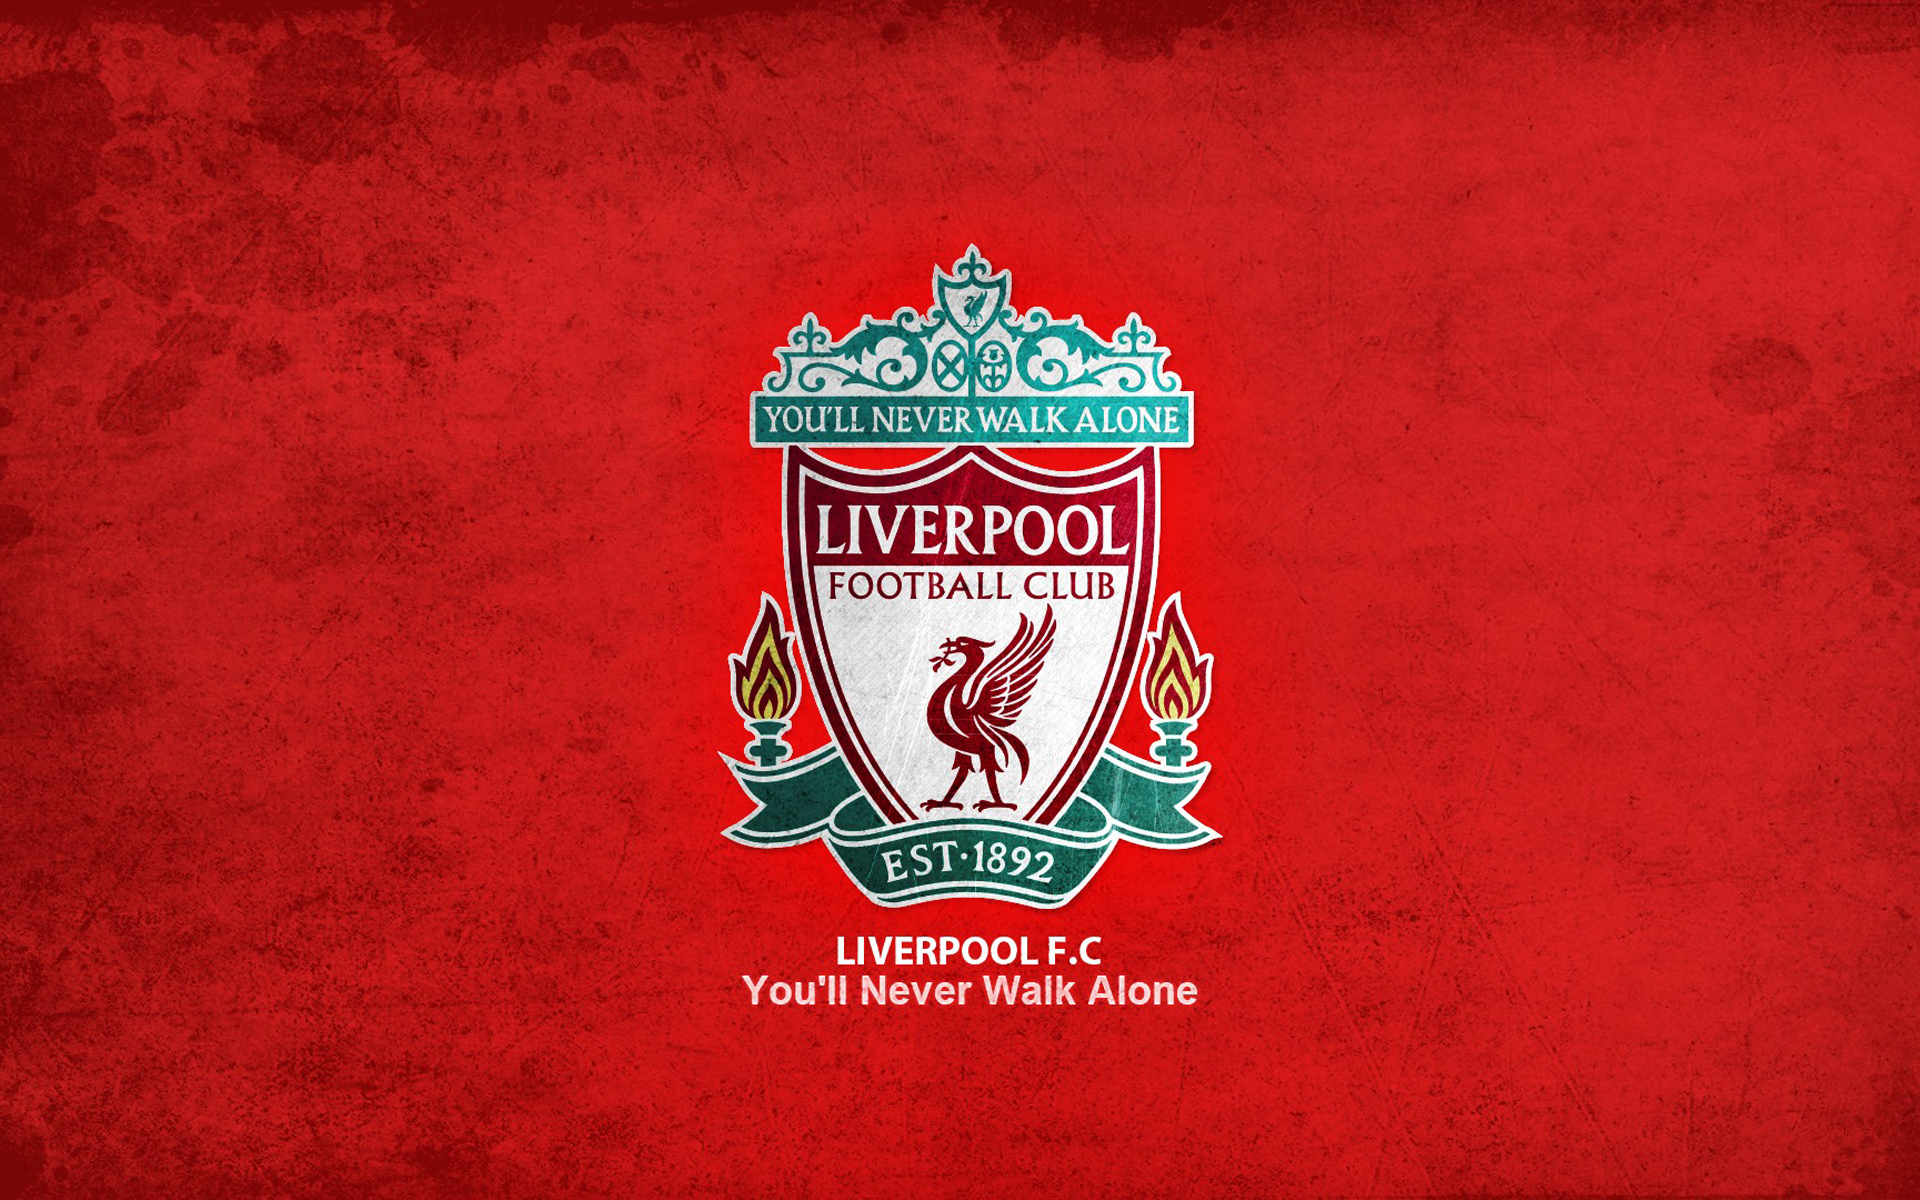 Liverpool Football Club wallpapers and images - wallpapers, pictures